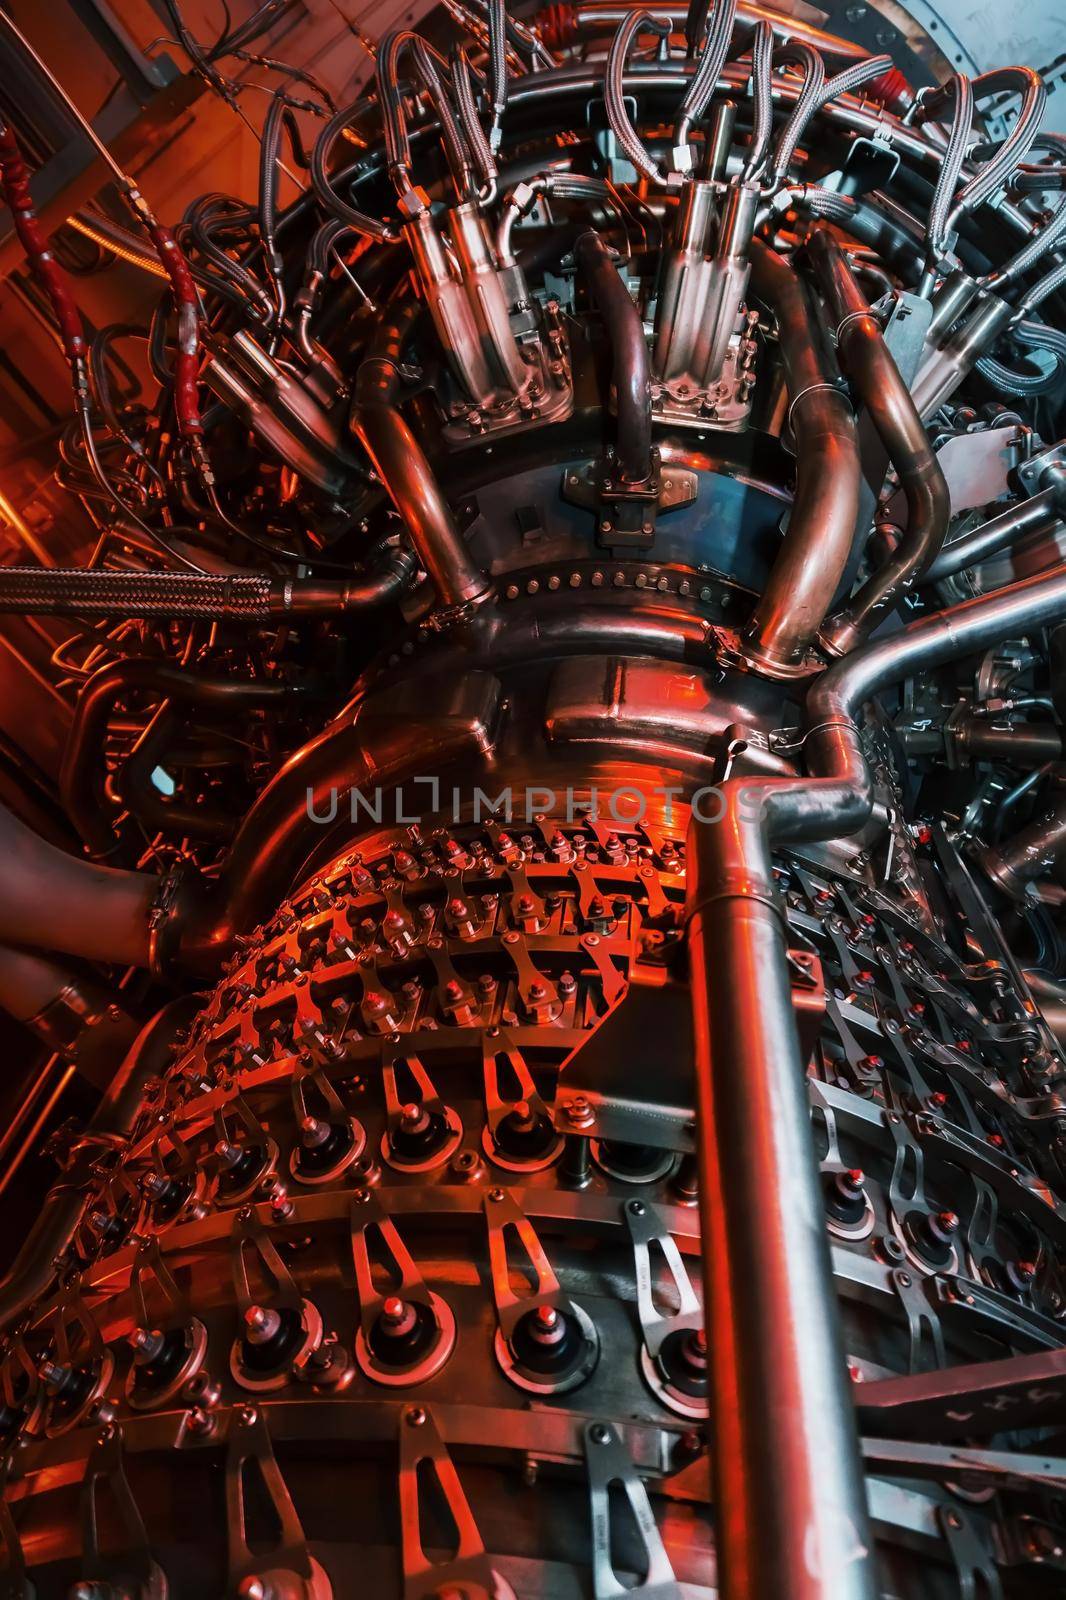 Parts of the operational gas turbine engine of a jet aircraft. Heavy industry and industry.